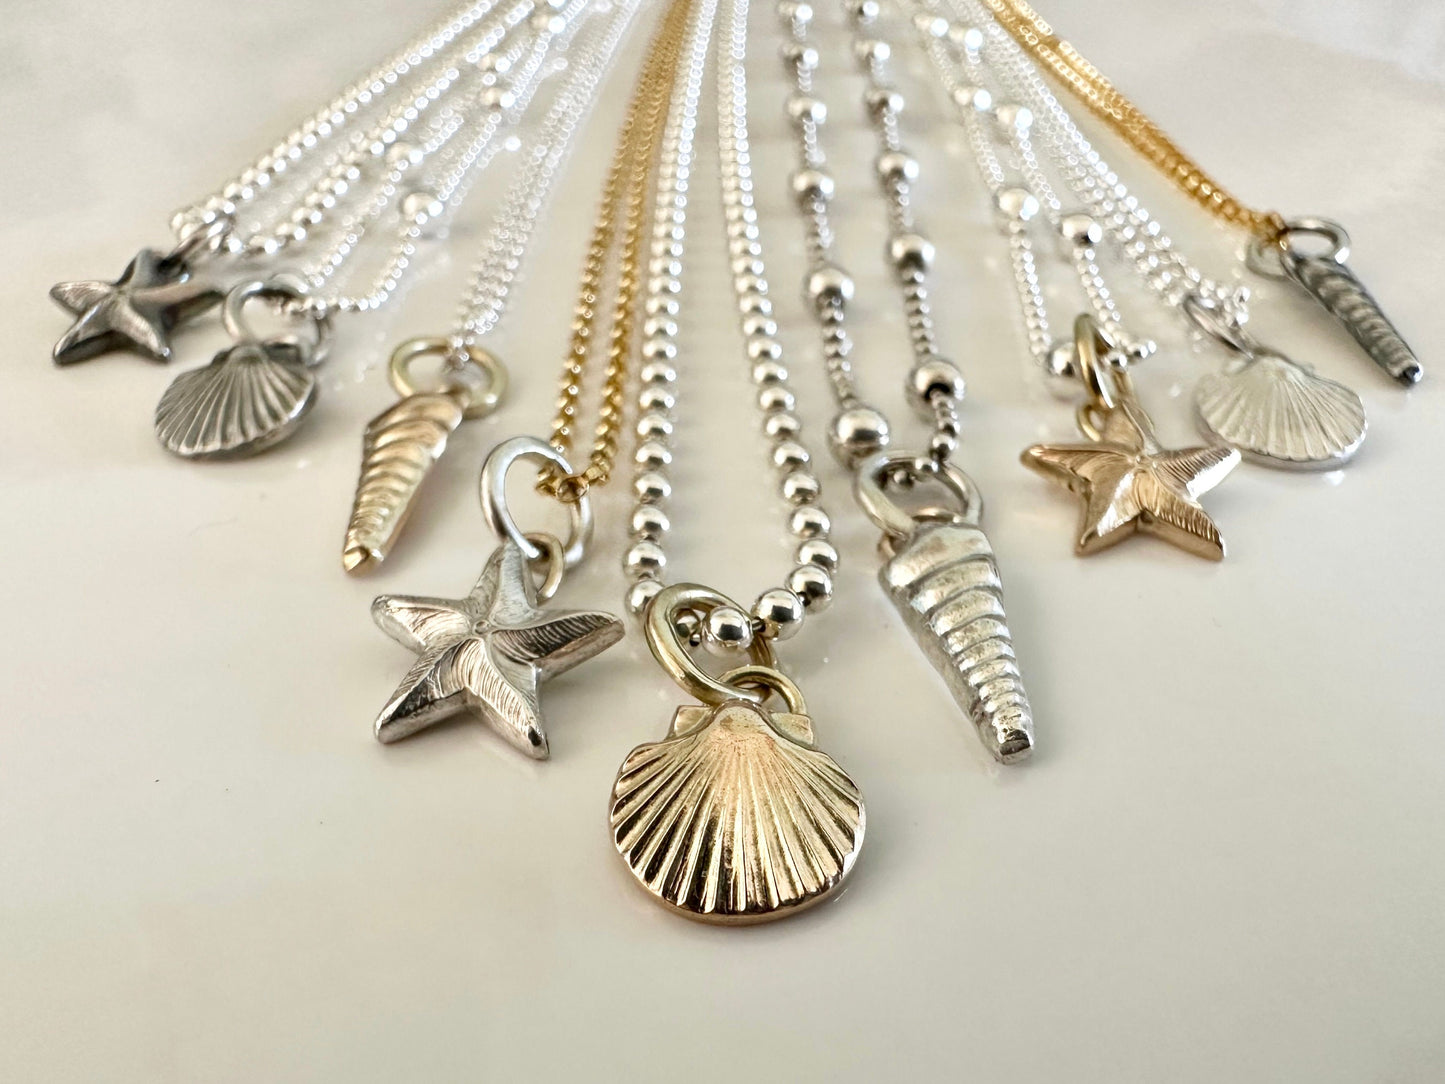 Solid 9ct gold Scallop Seashell pendant charm necklace, handmade from recycled 9ct gold, made to order